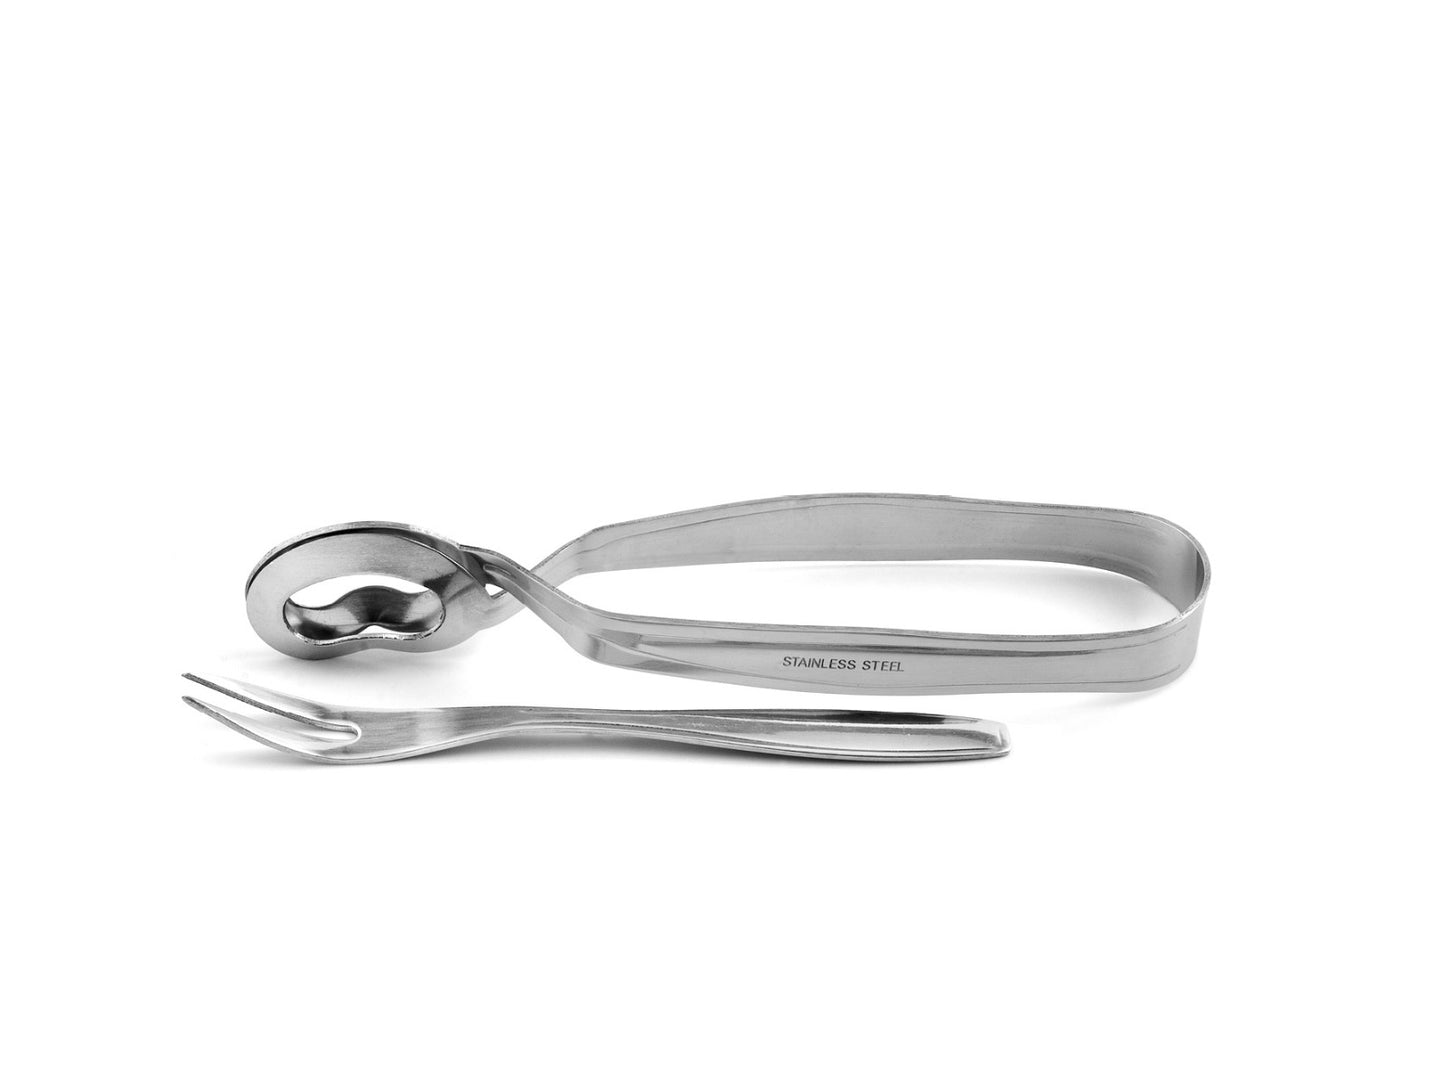 Weis snail tongs and fork